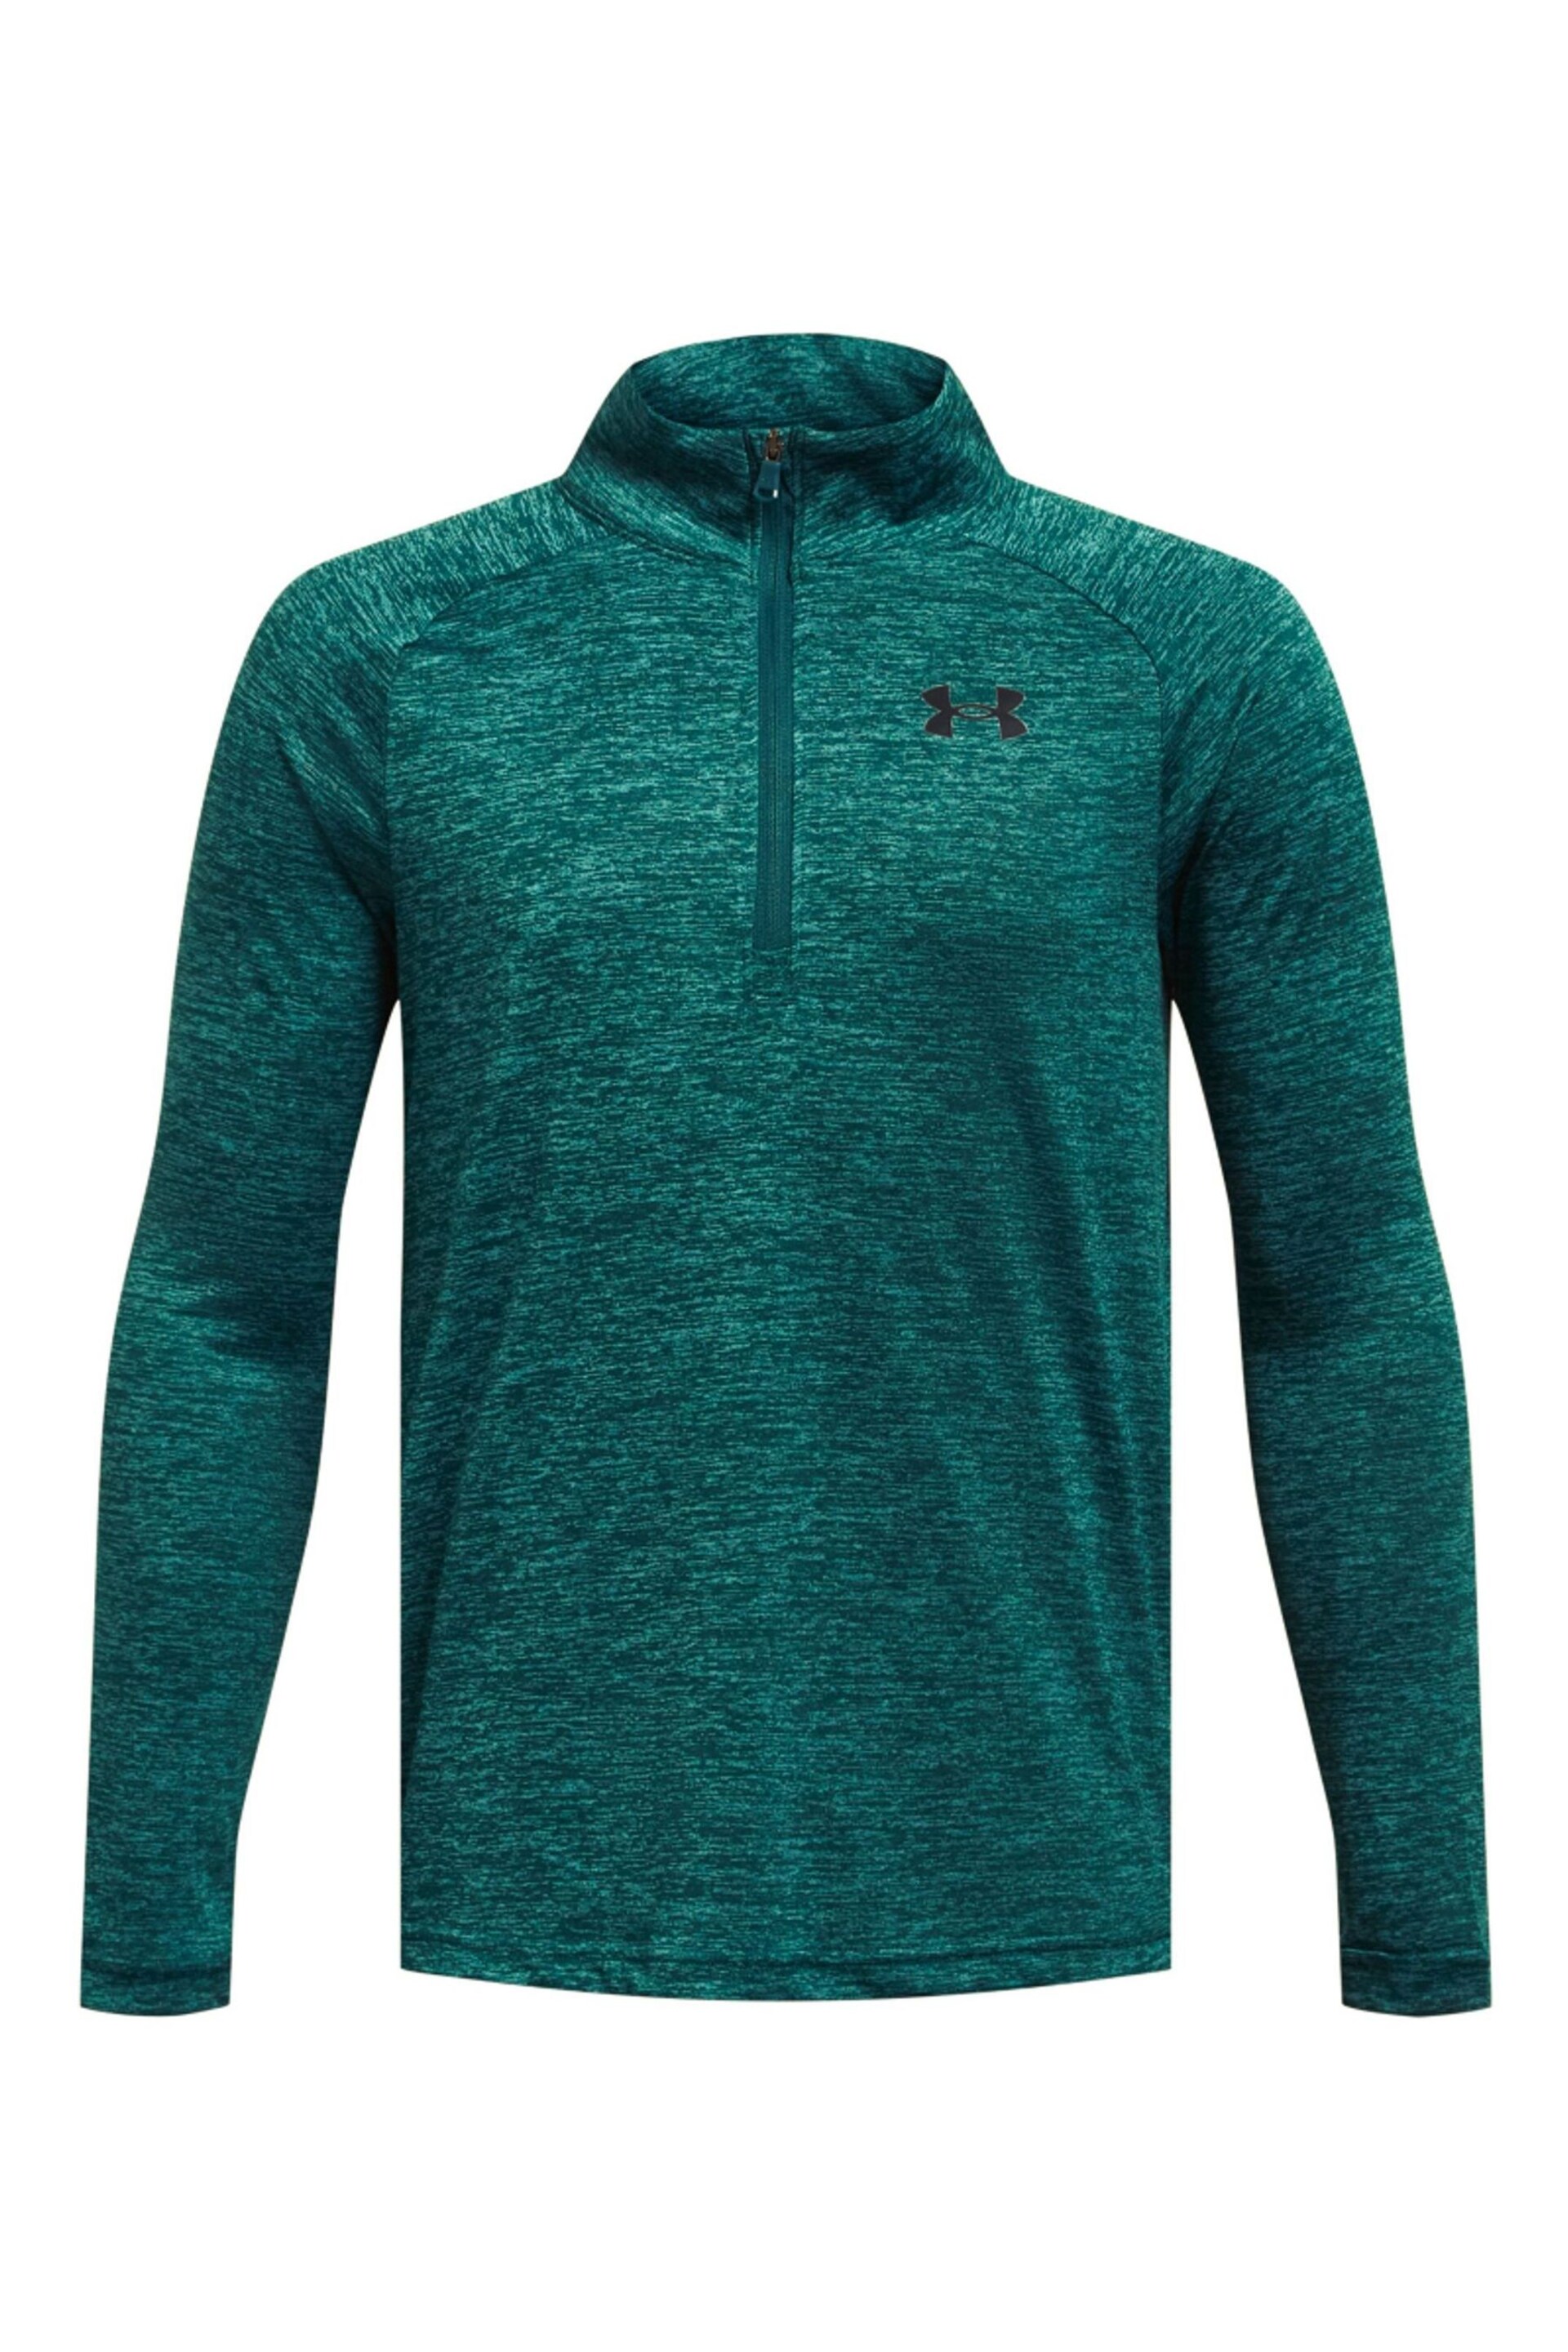 Under Armour Blue Tech 2.0 1/2 Zip Sweater - Image 1 of 2